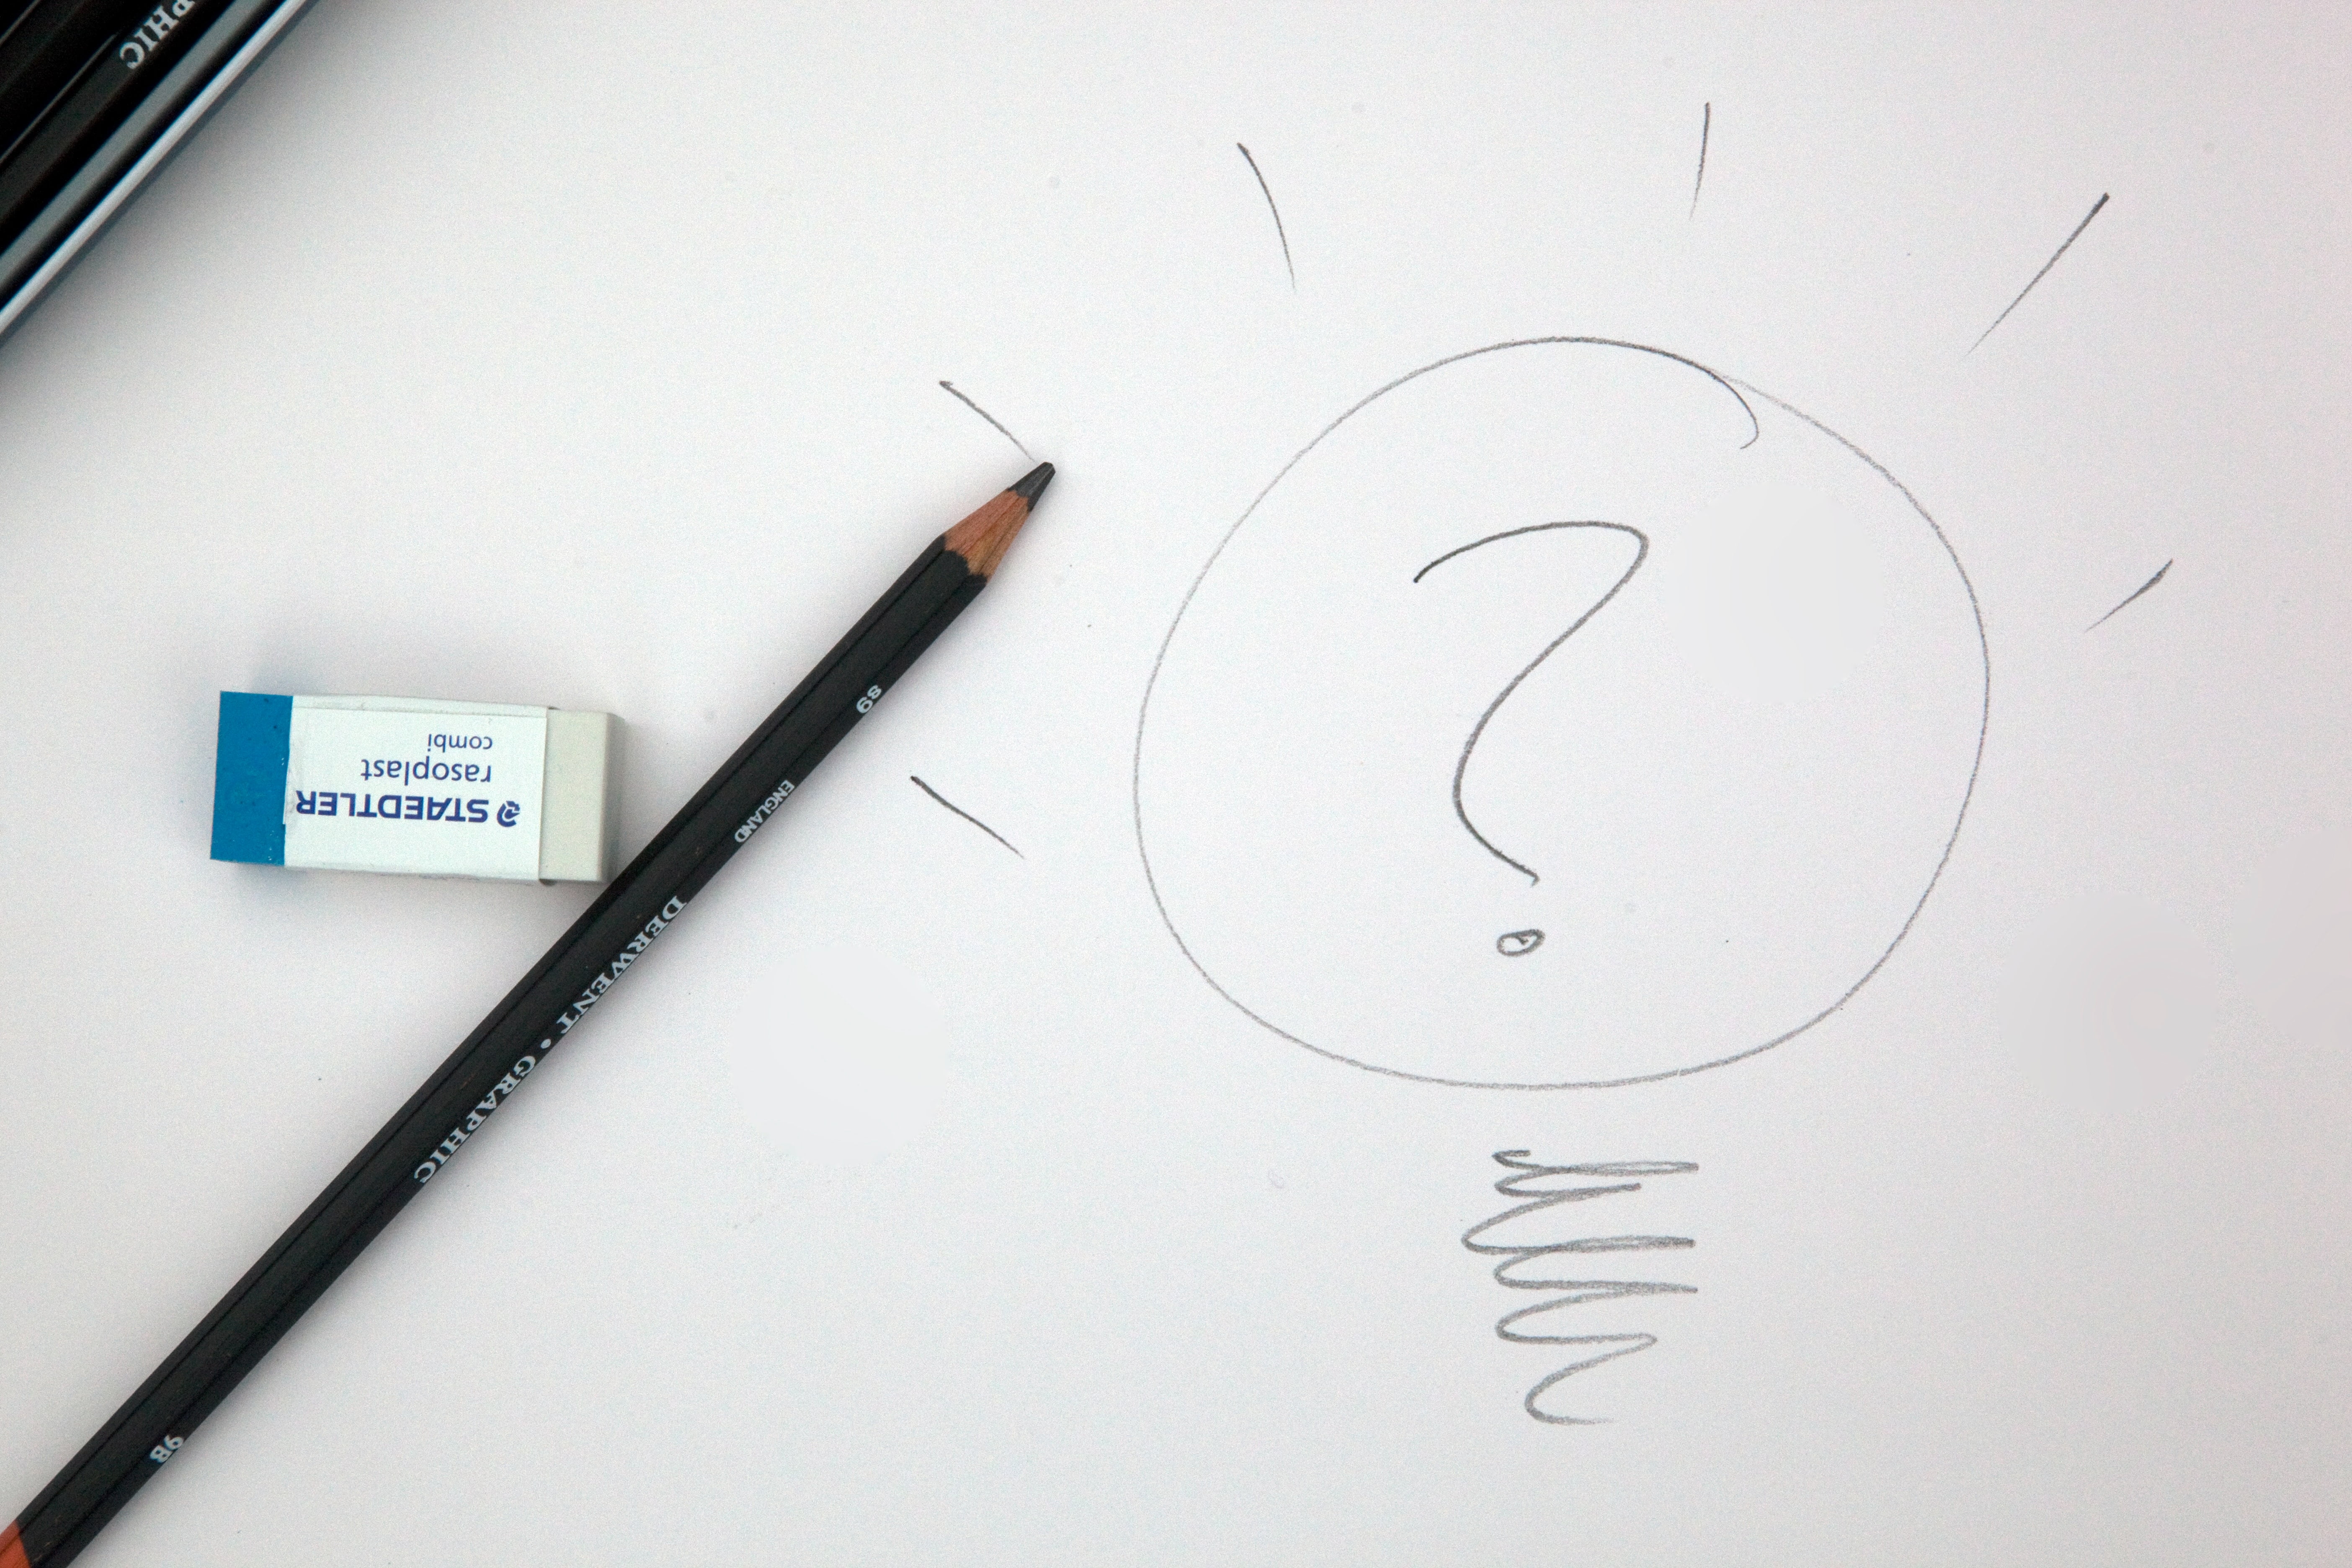 A black pencil and Staedtler Eraser on top of a pencil drawing of a question mark inside of a lightbulb